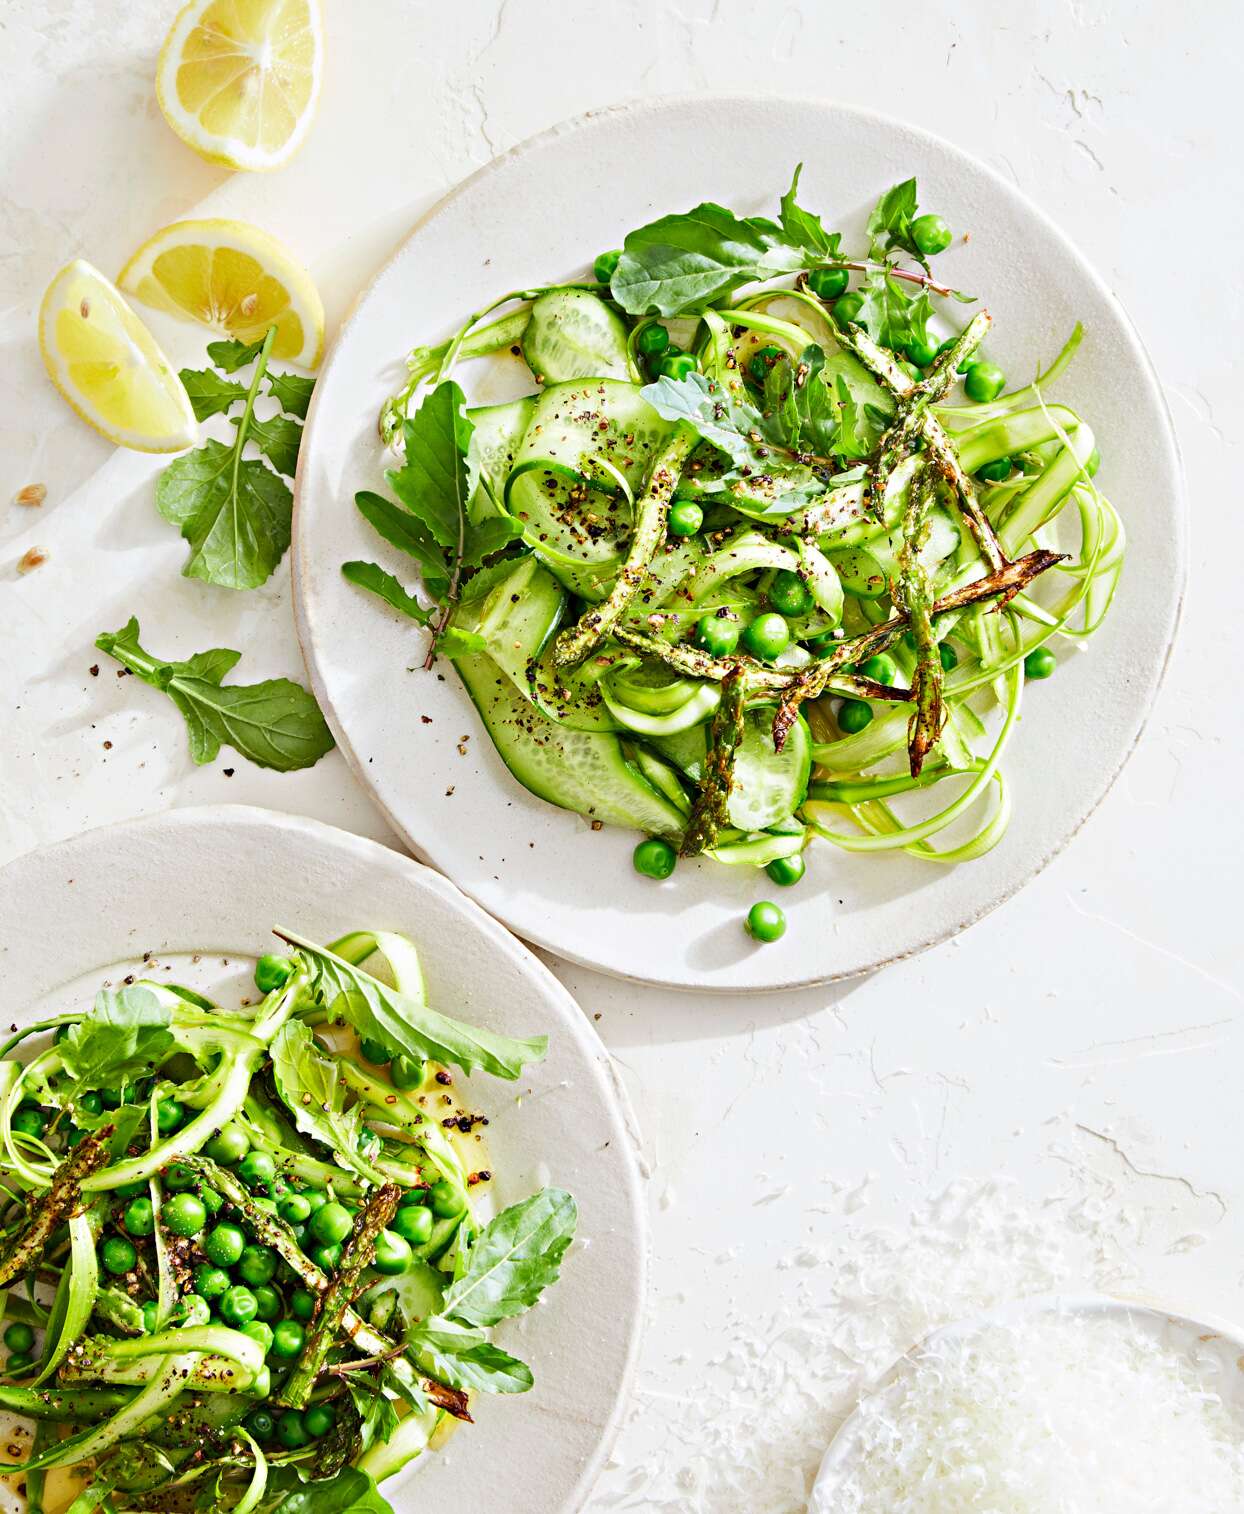 Salad Freak: Recipes to Feed a Healthy Obsession - The Crowd Went Wild